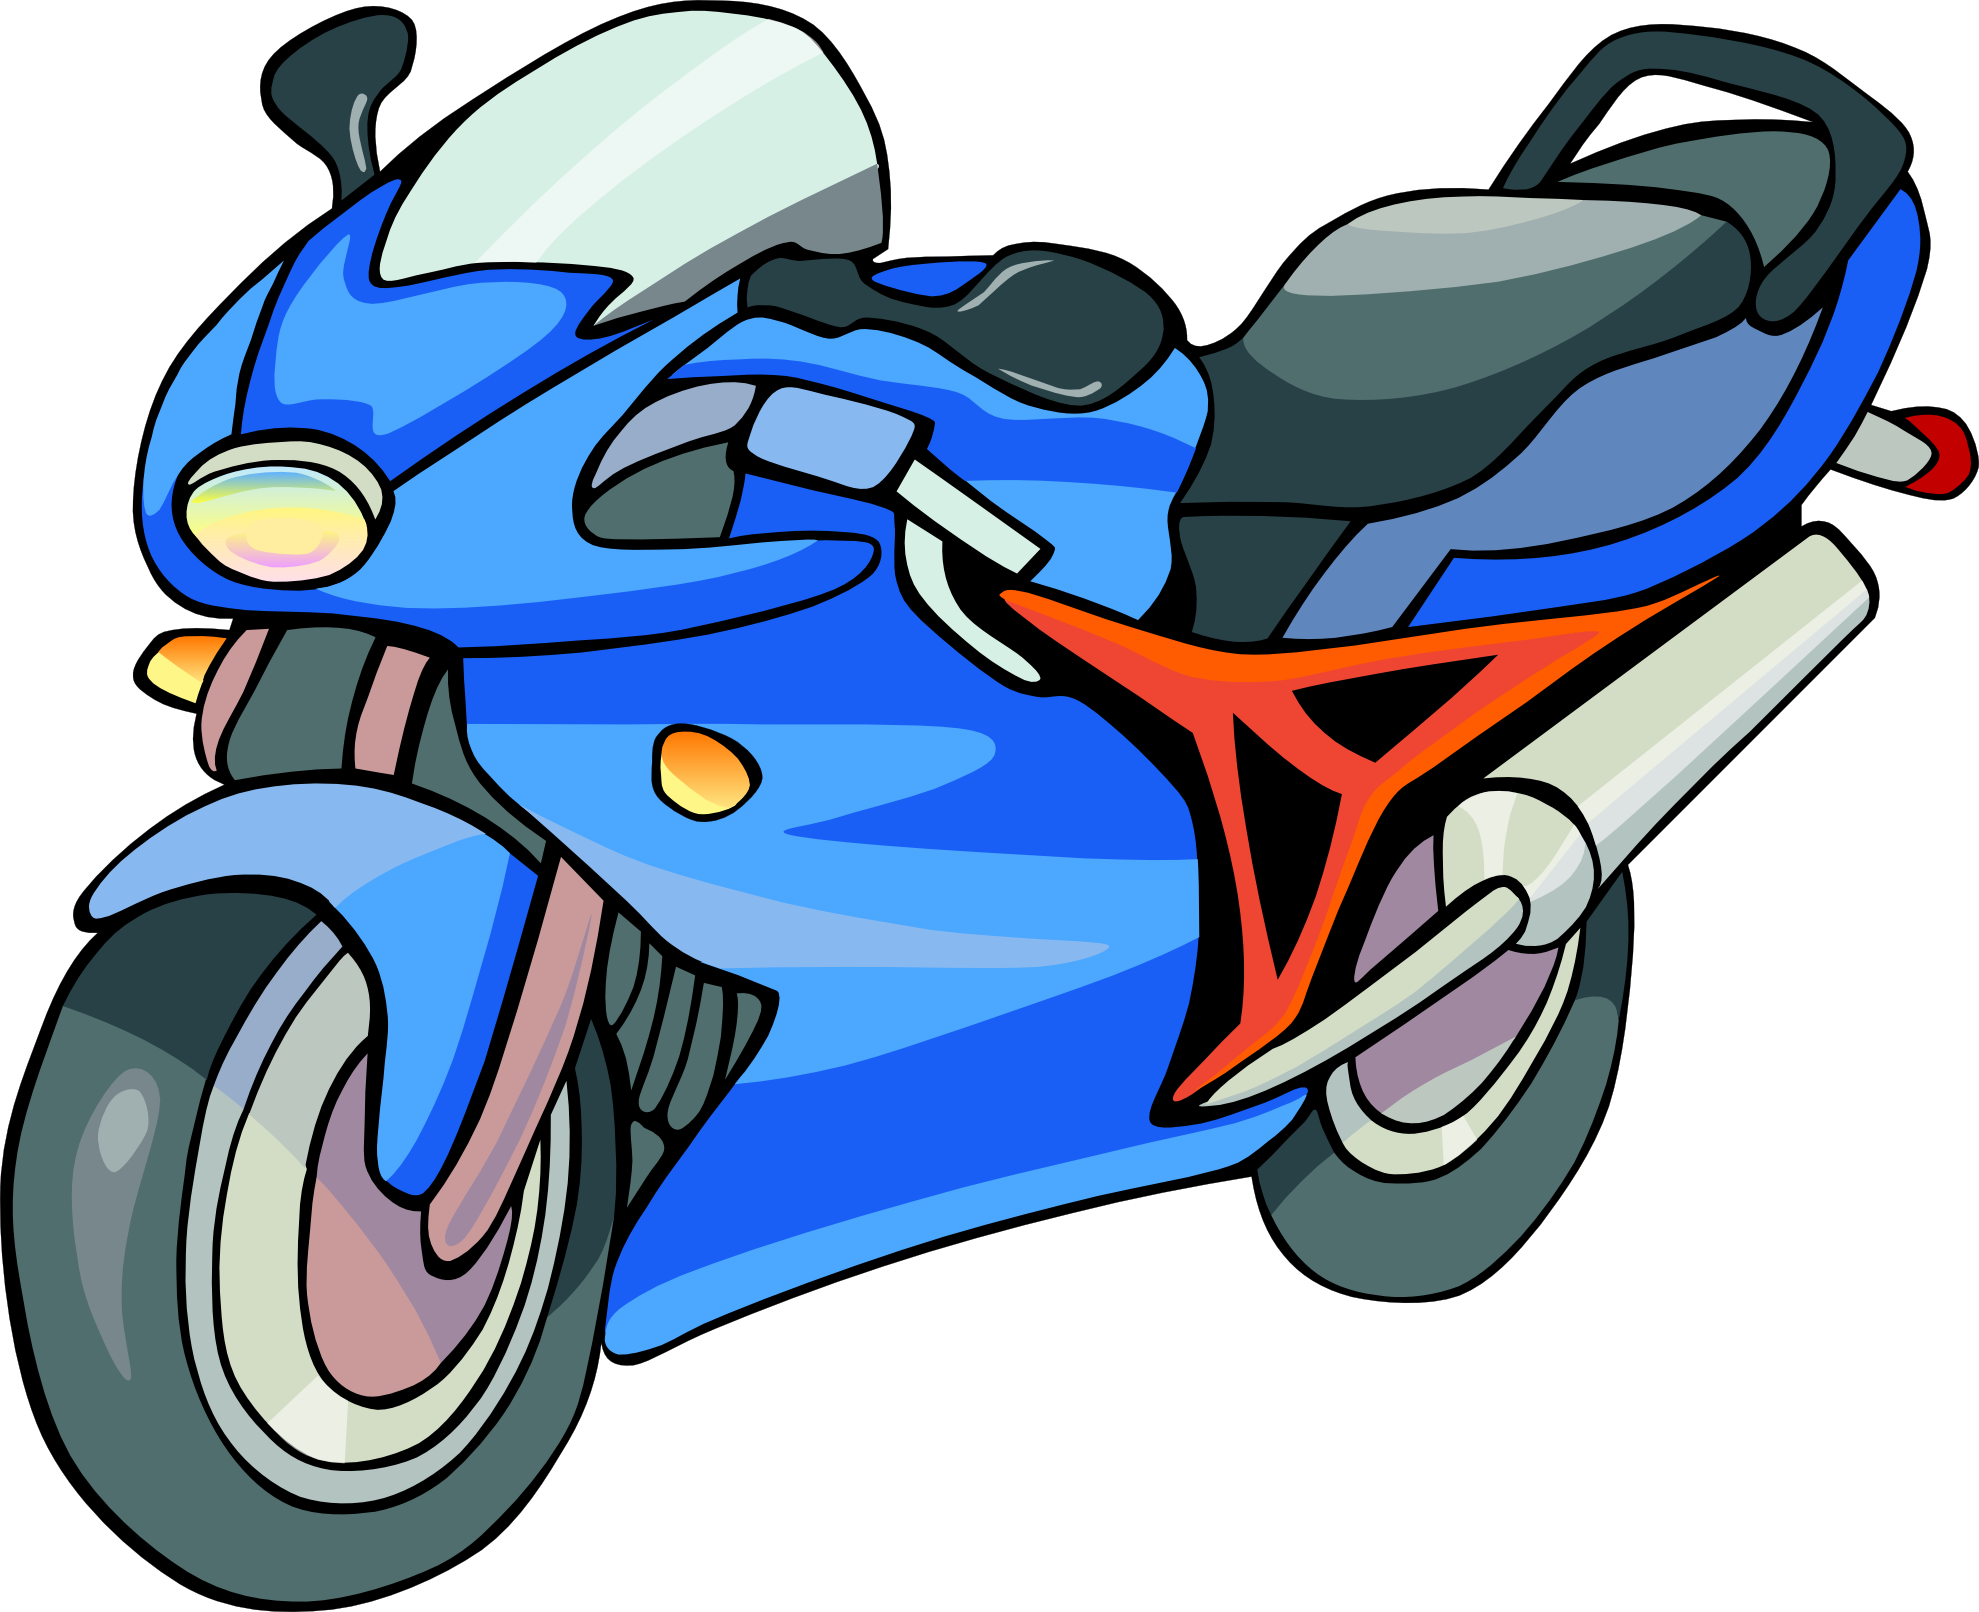 Free Images Motorcycles, Download Free Clip Art, Free Clip